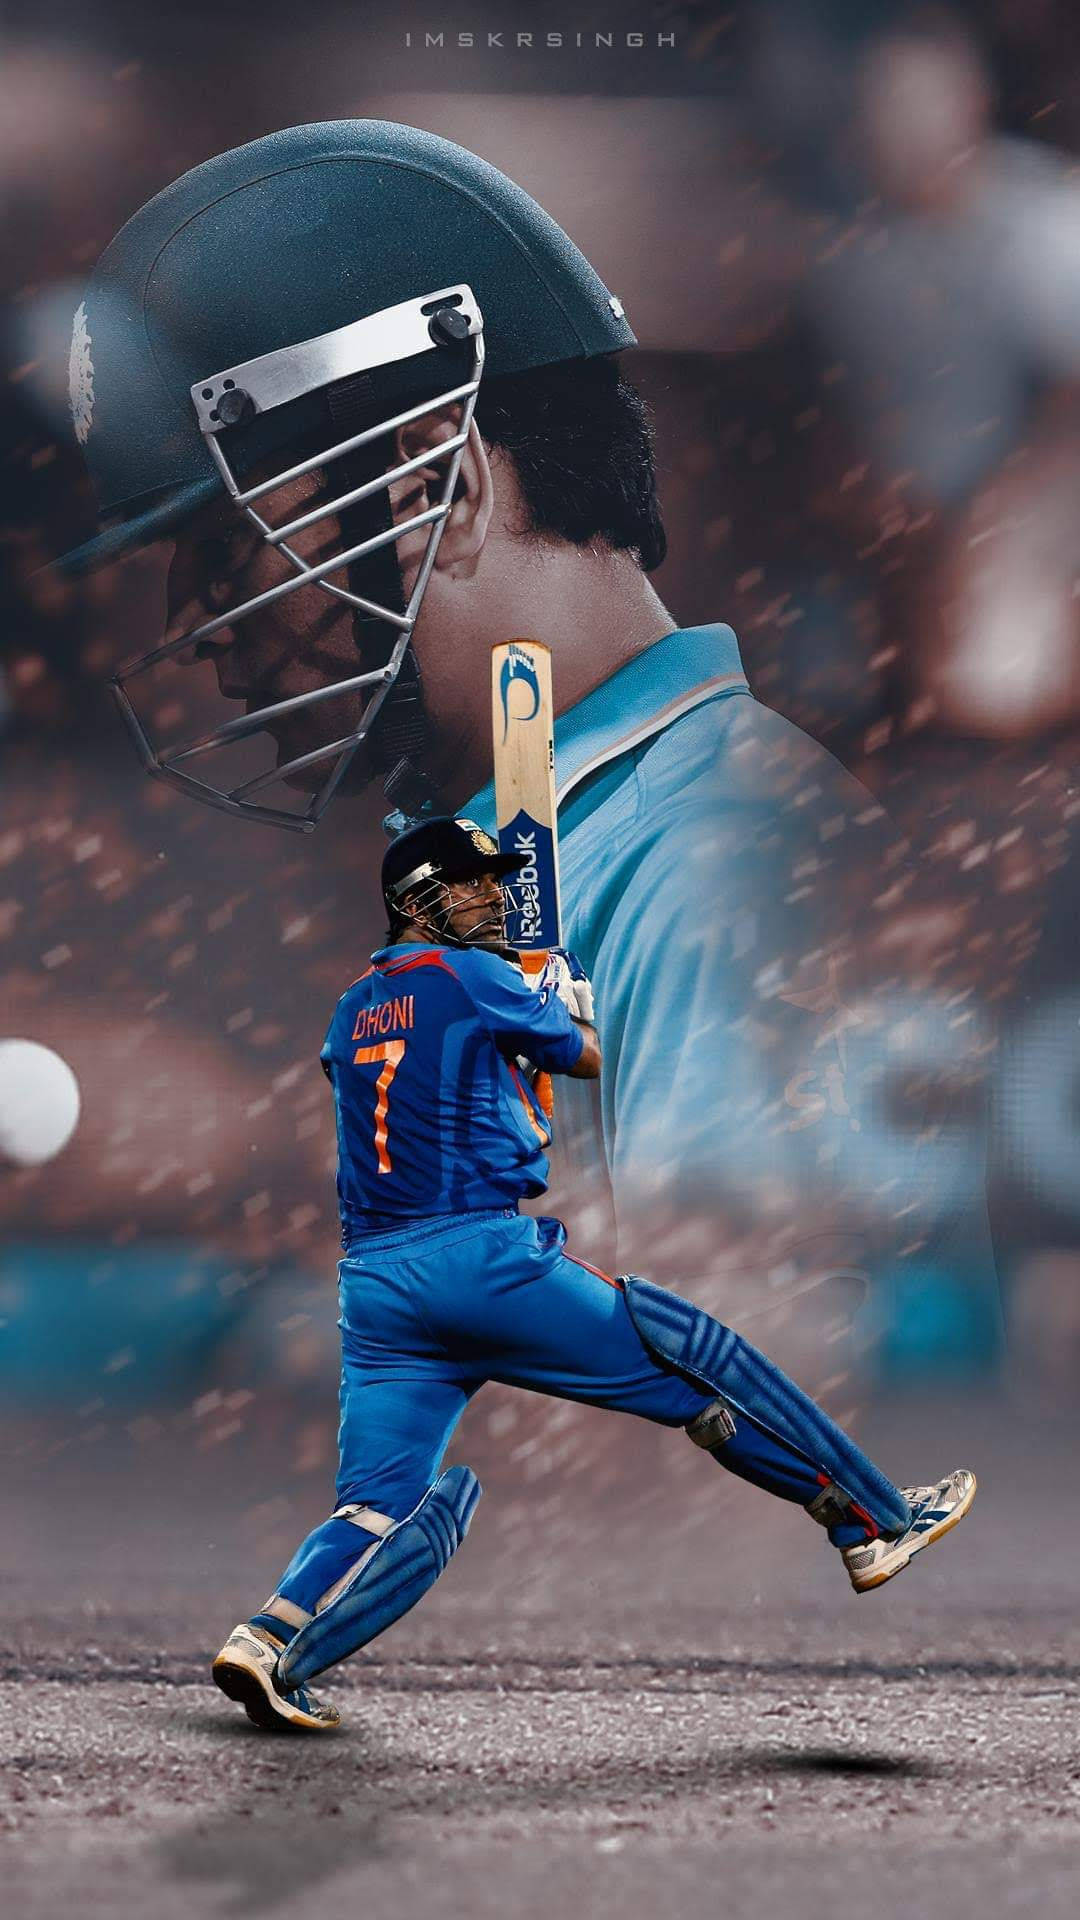 Indisk Cricketer Ms Dhoni Hd Wallpaper